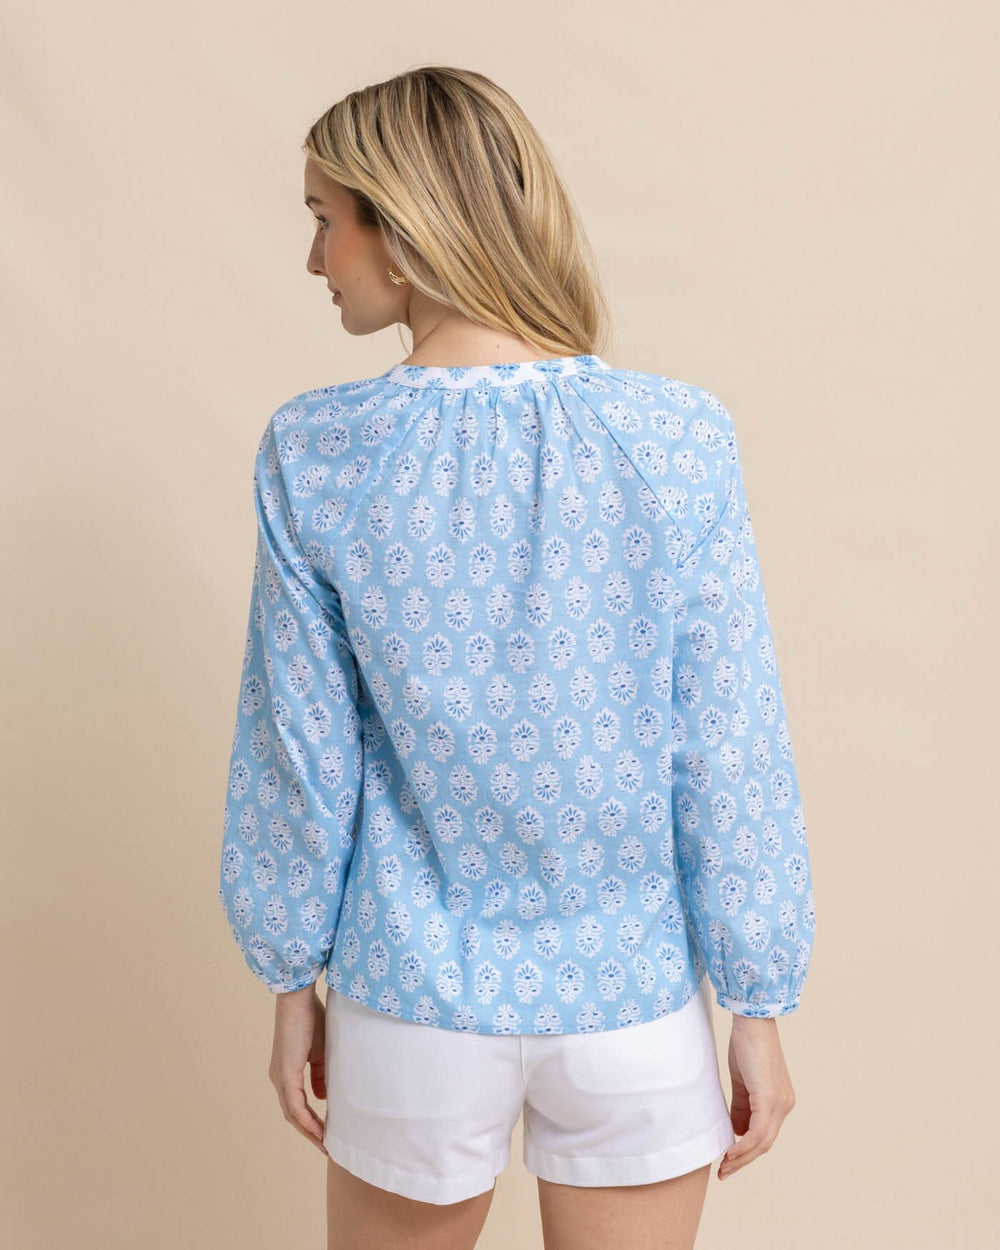 The back view of the Southern Tide Kinsey Garden Variety Printed Top by Southern Tide - Clearwater Blue